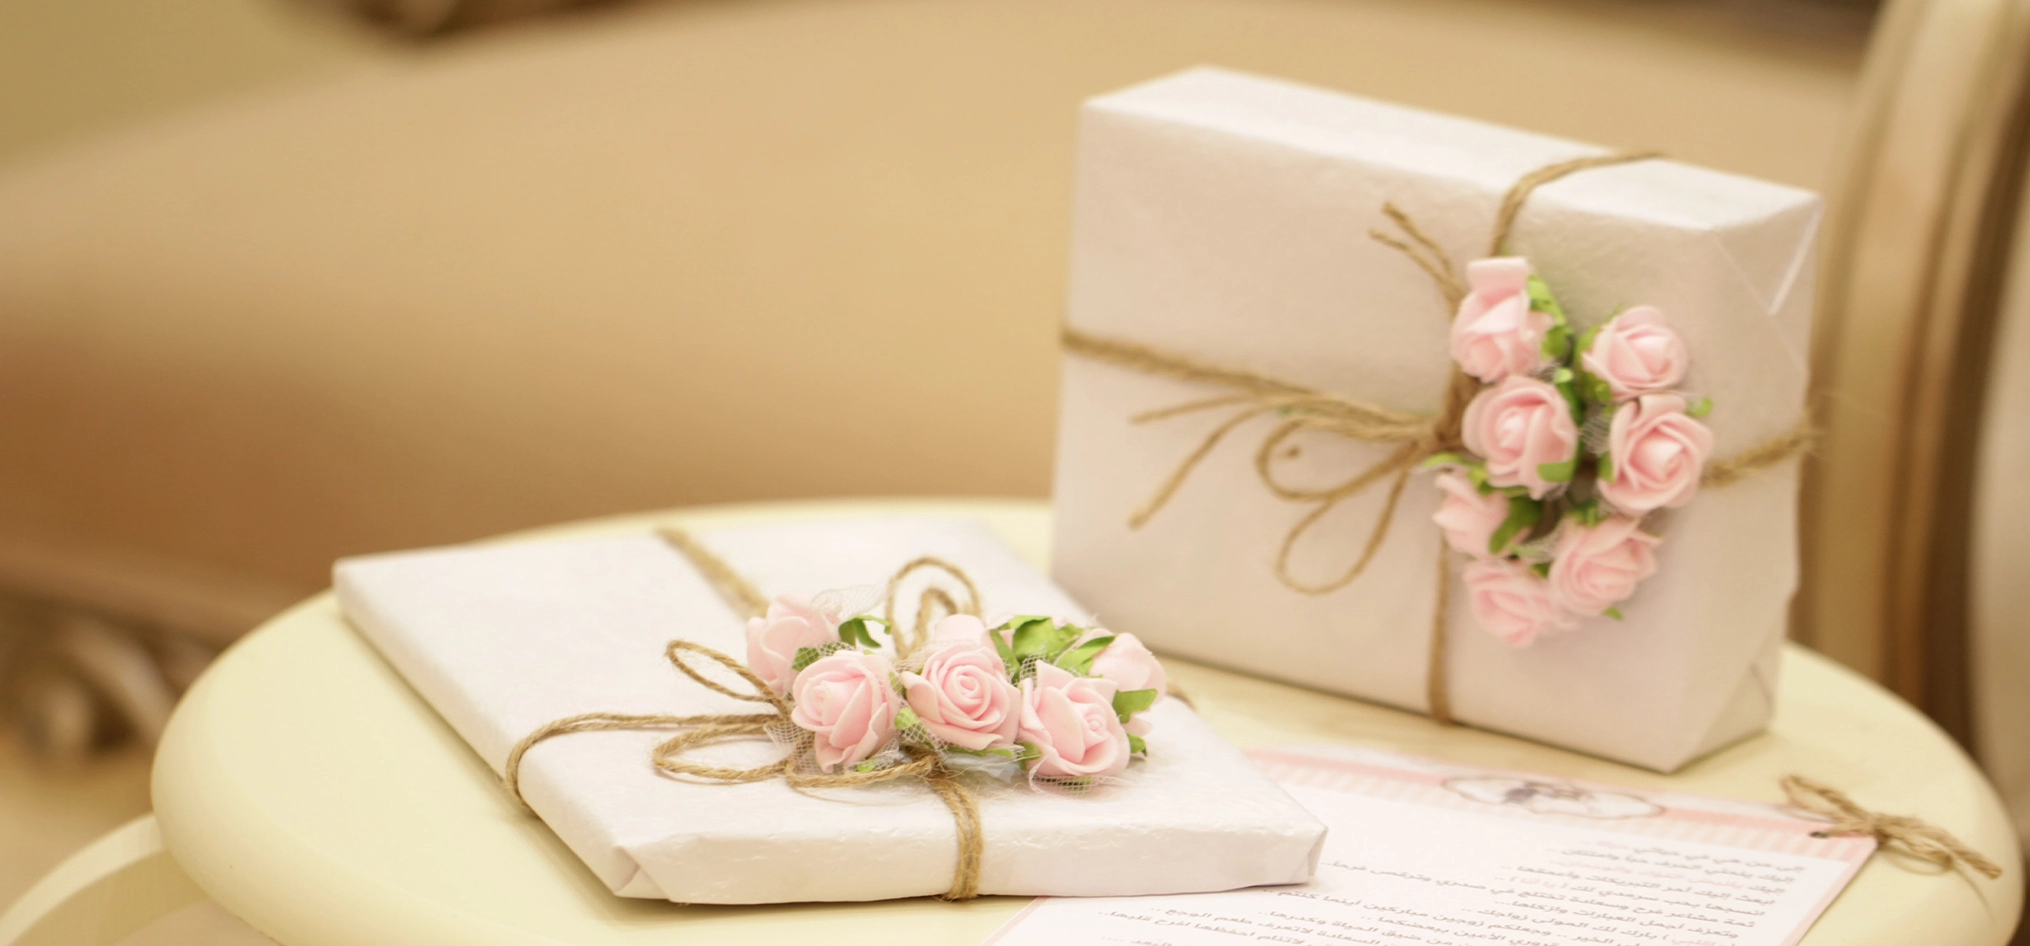 Things to Consider Before Buying A Gift for Her